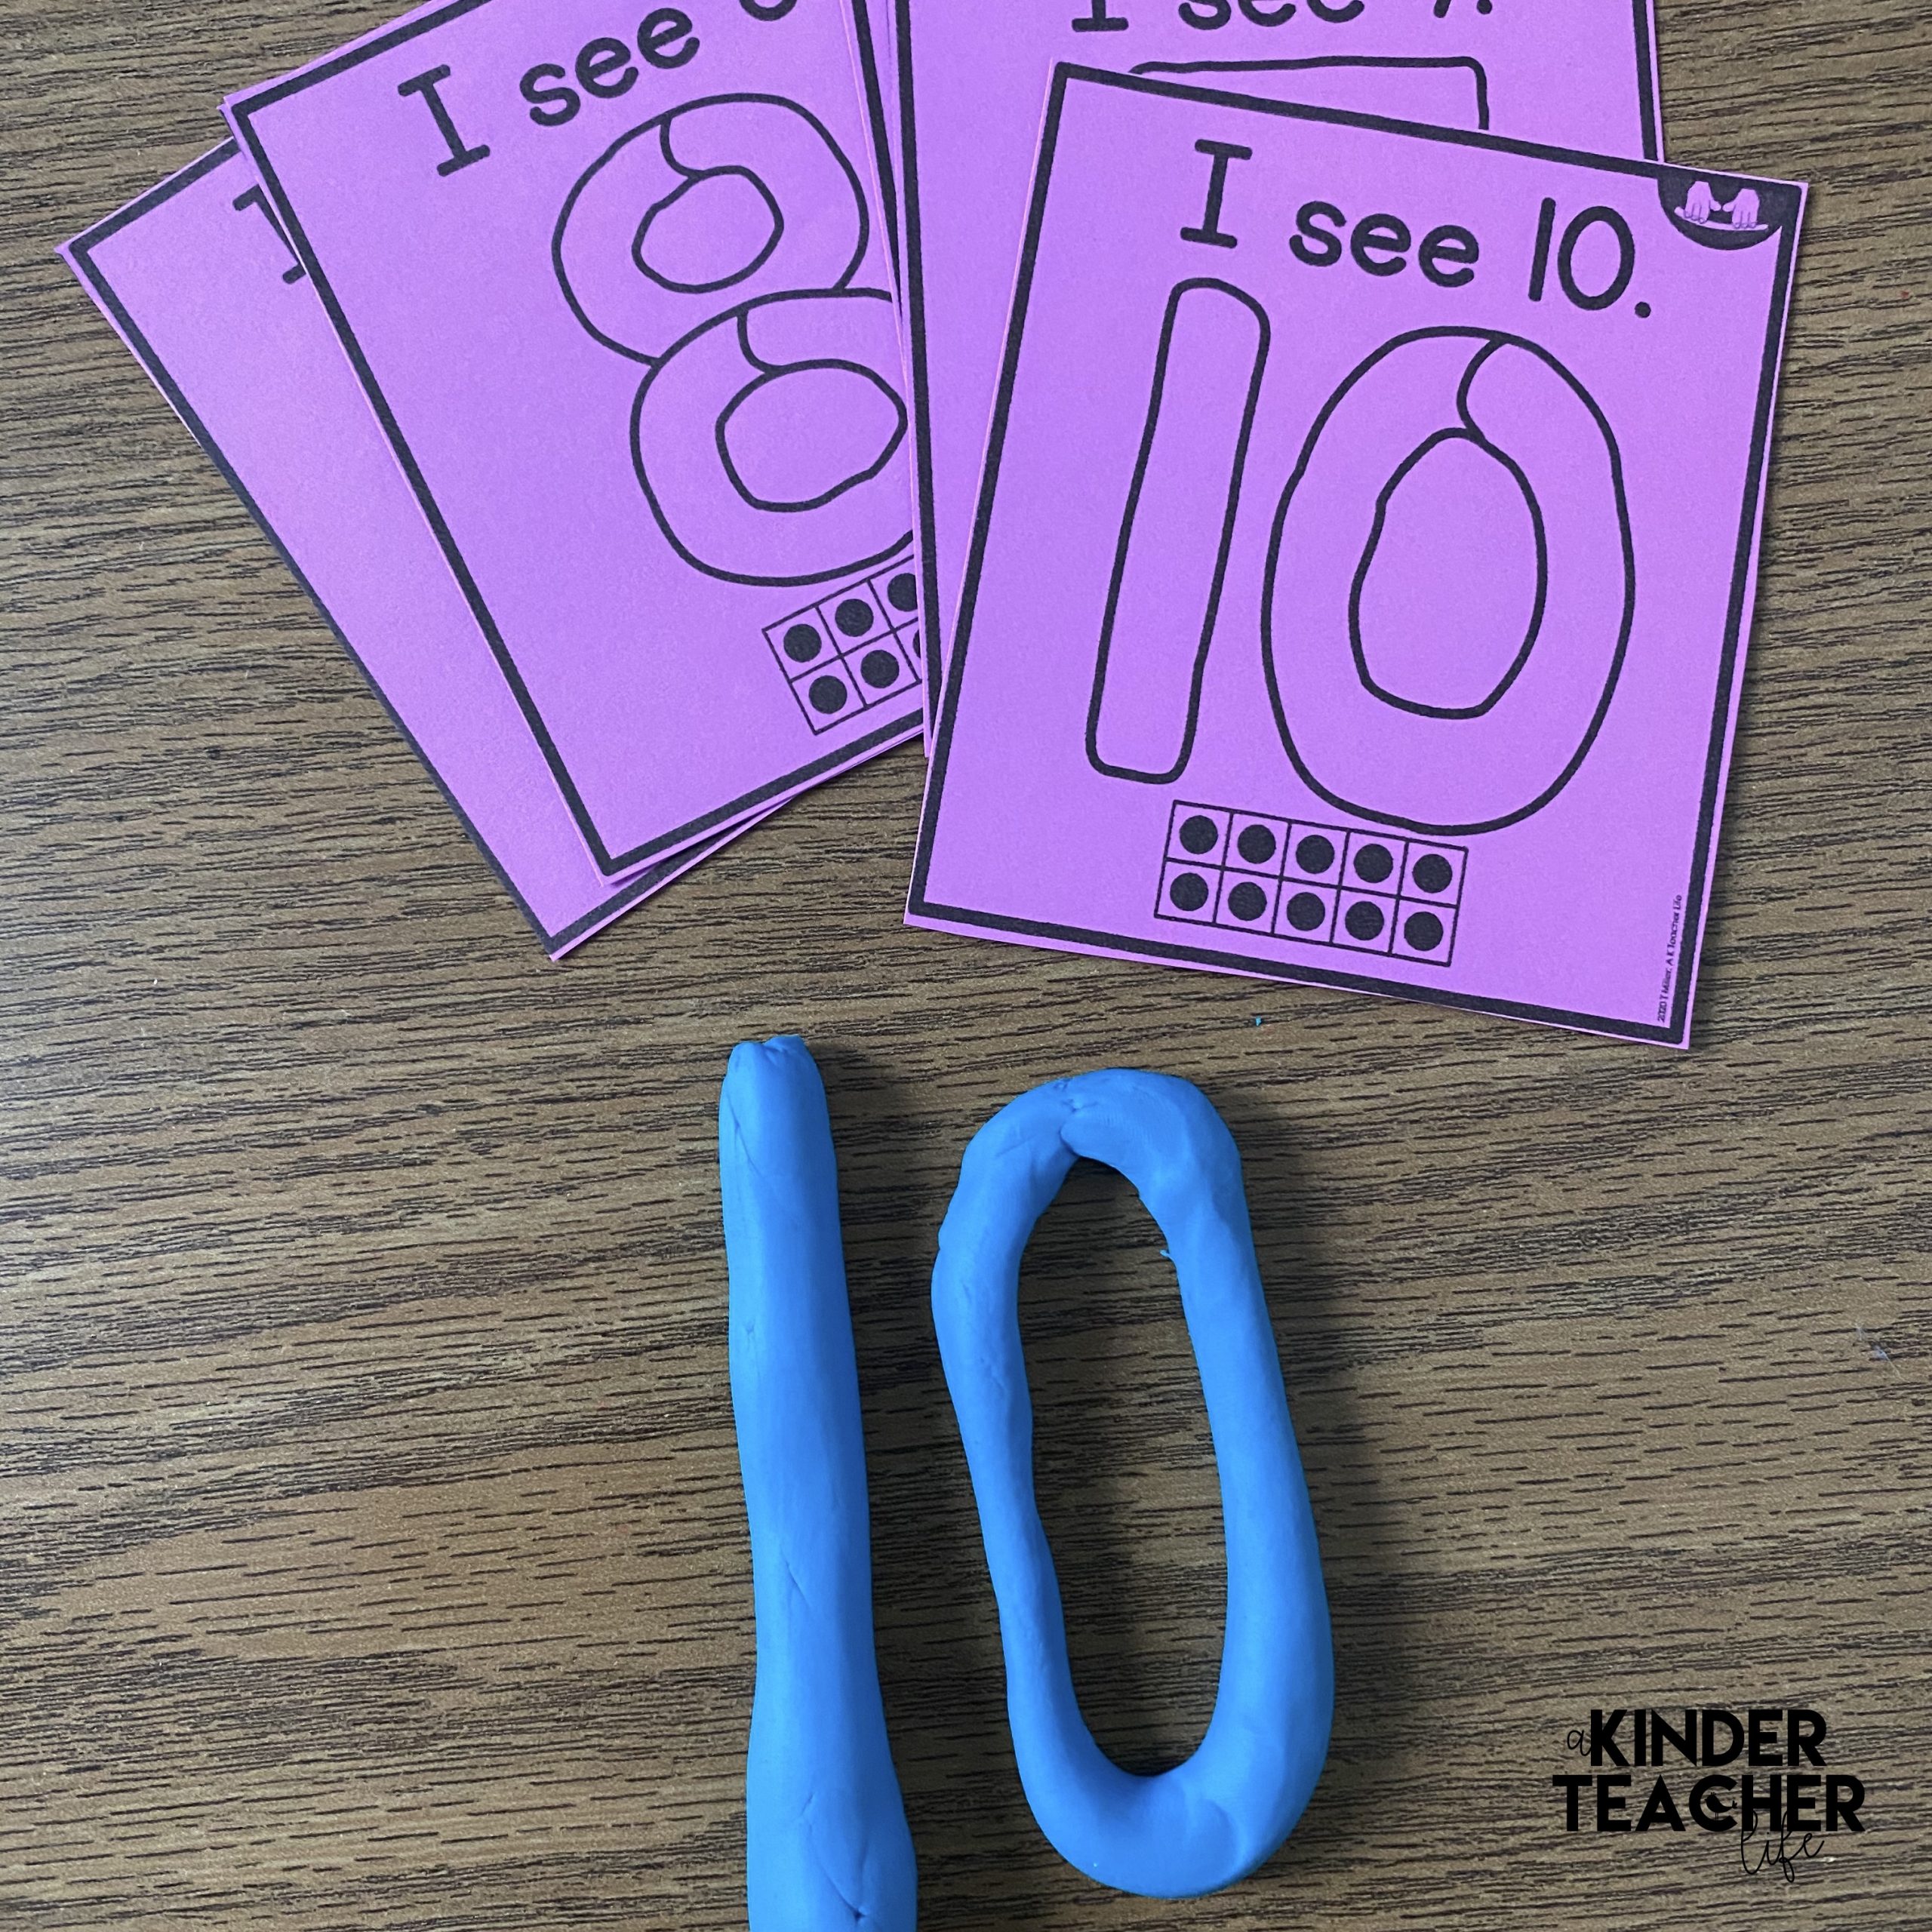 Playdough Task Cards - Use play dough to build numbers and letters.